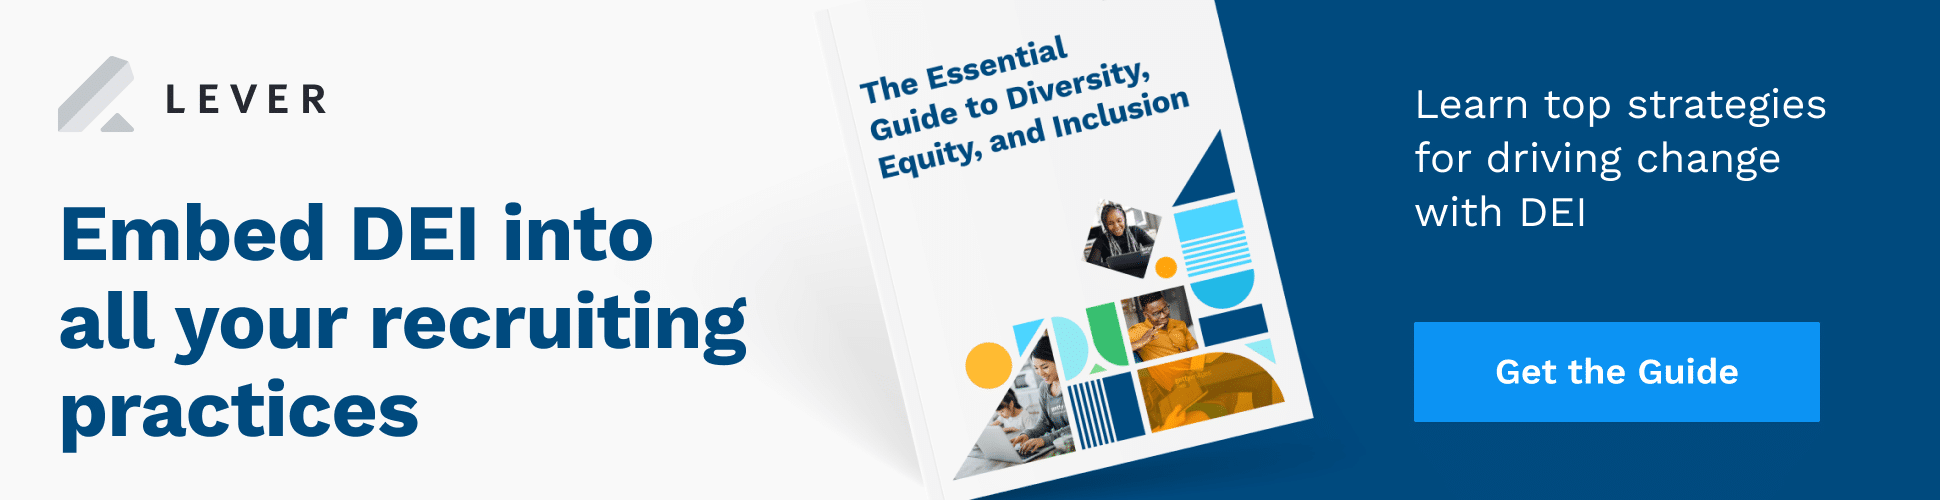 diversity equity inclusion dei guide